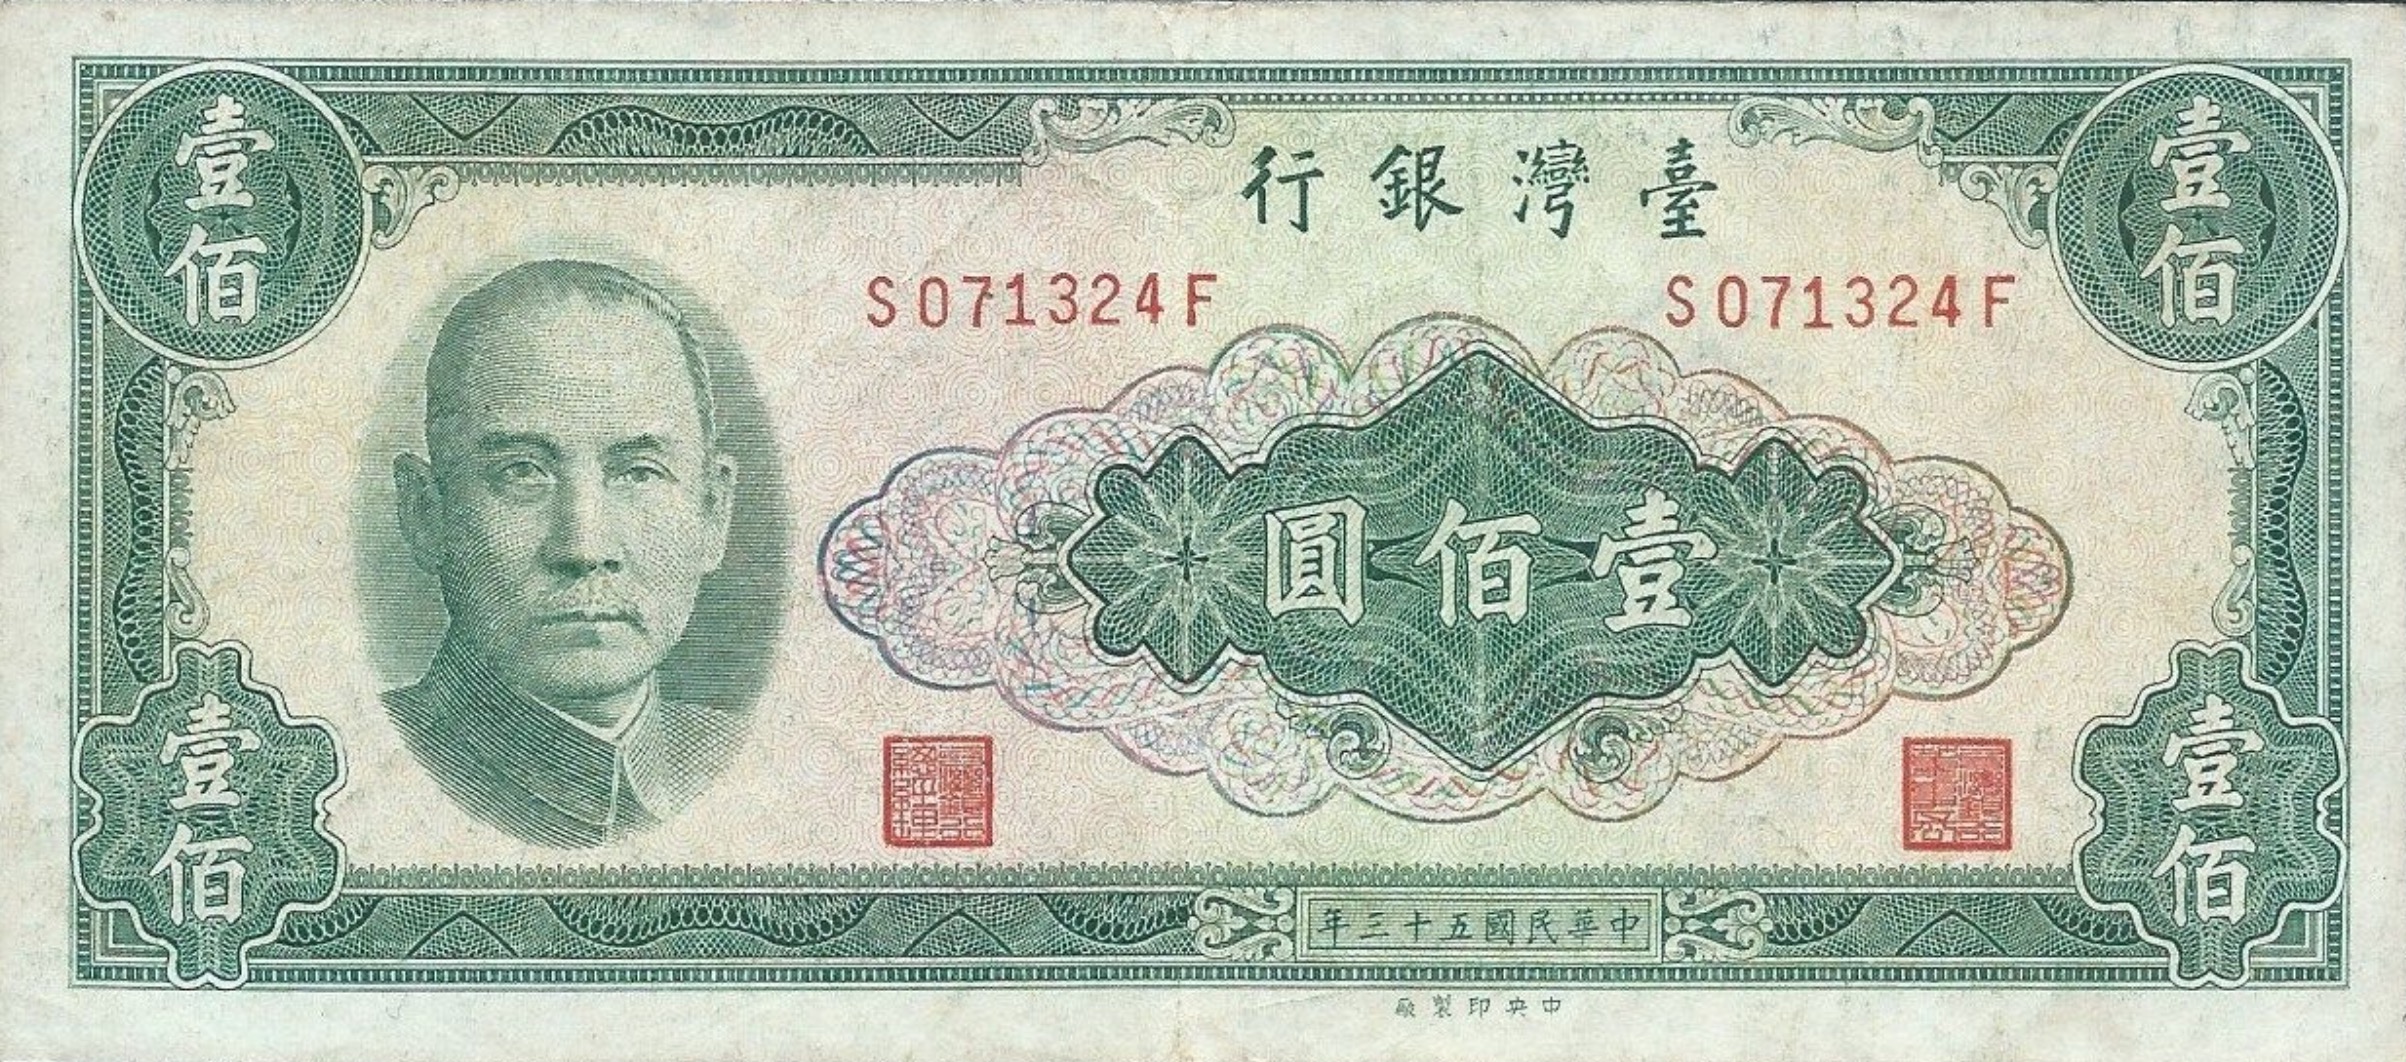 100 New Taiwan Dollars banknote (1964 issue) - Exchange yours for cash